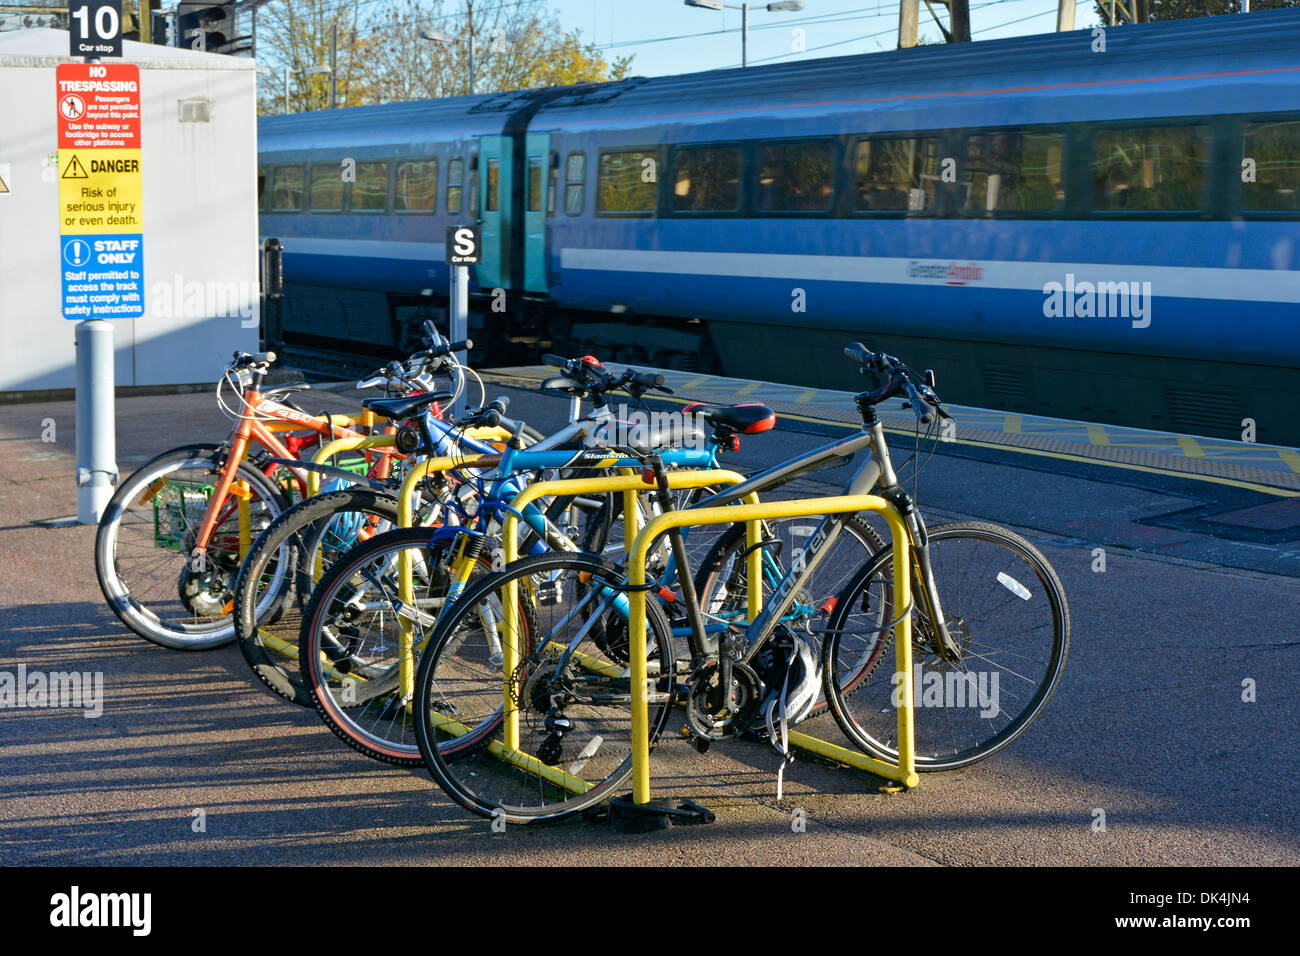 Cycle rack on platform at train station Stock Photo